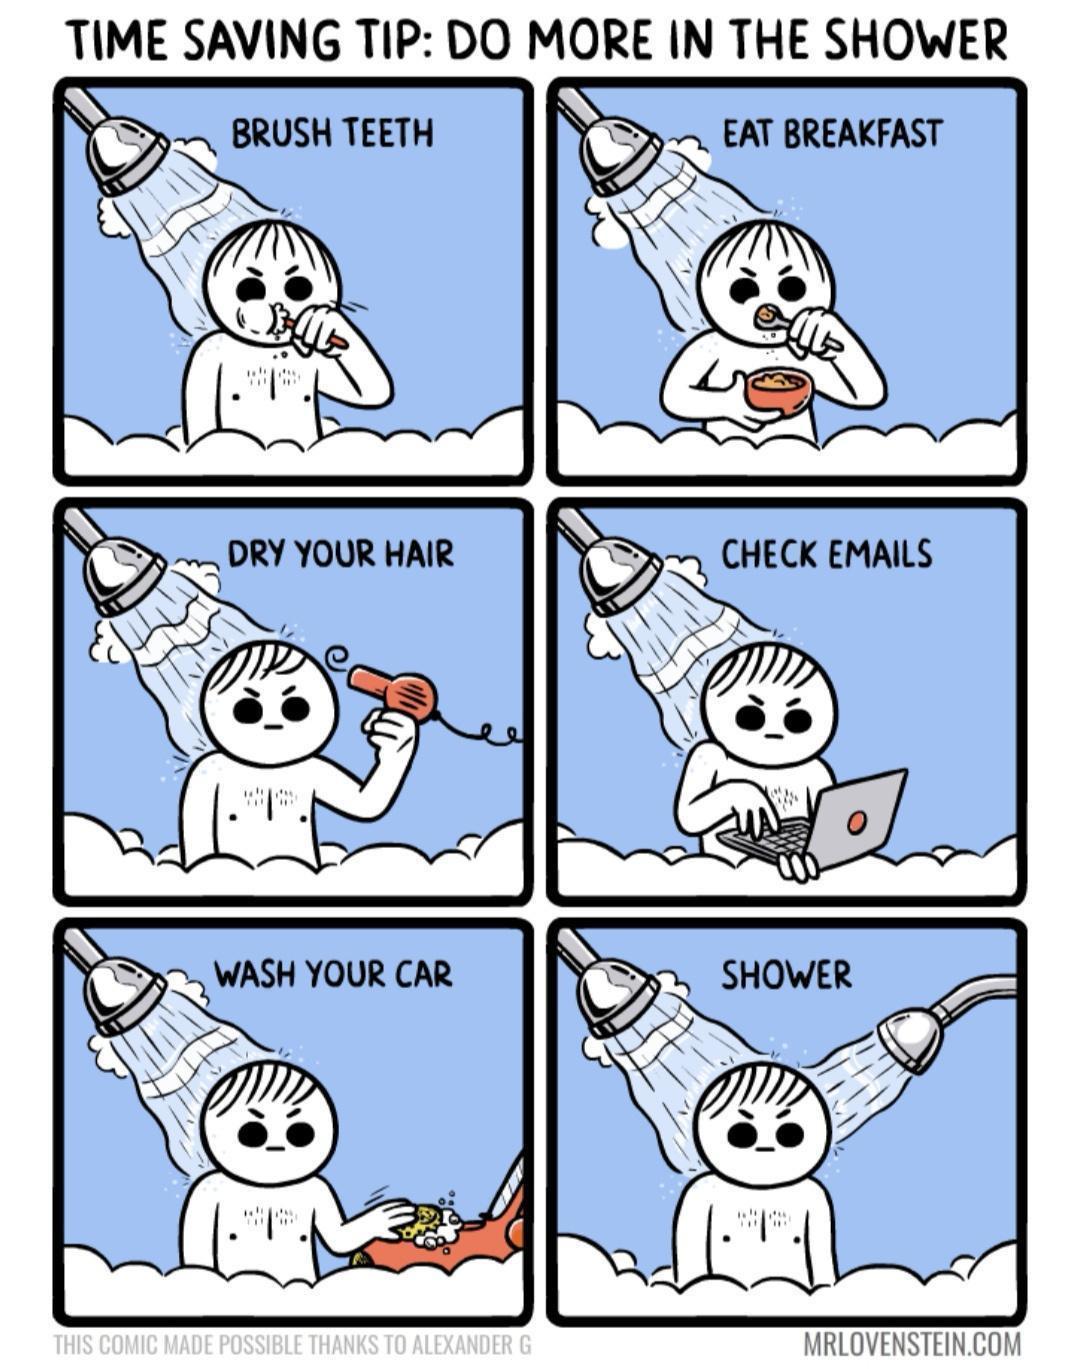 fresh memes - funny memes - existential dread meme - Time Saving Tip Do More In The Shower Brush Teeth Eat Breakfast Dry Your Hair Check Emails Wash Your Car Shower H This Comic Made Possible Thanks To Alexander G Mrlovenstein.Com